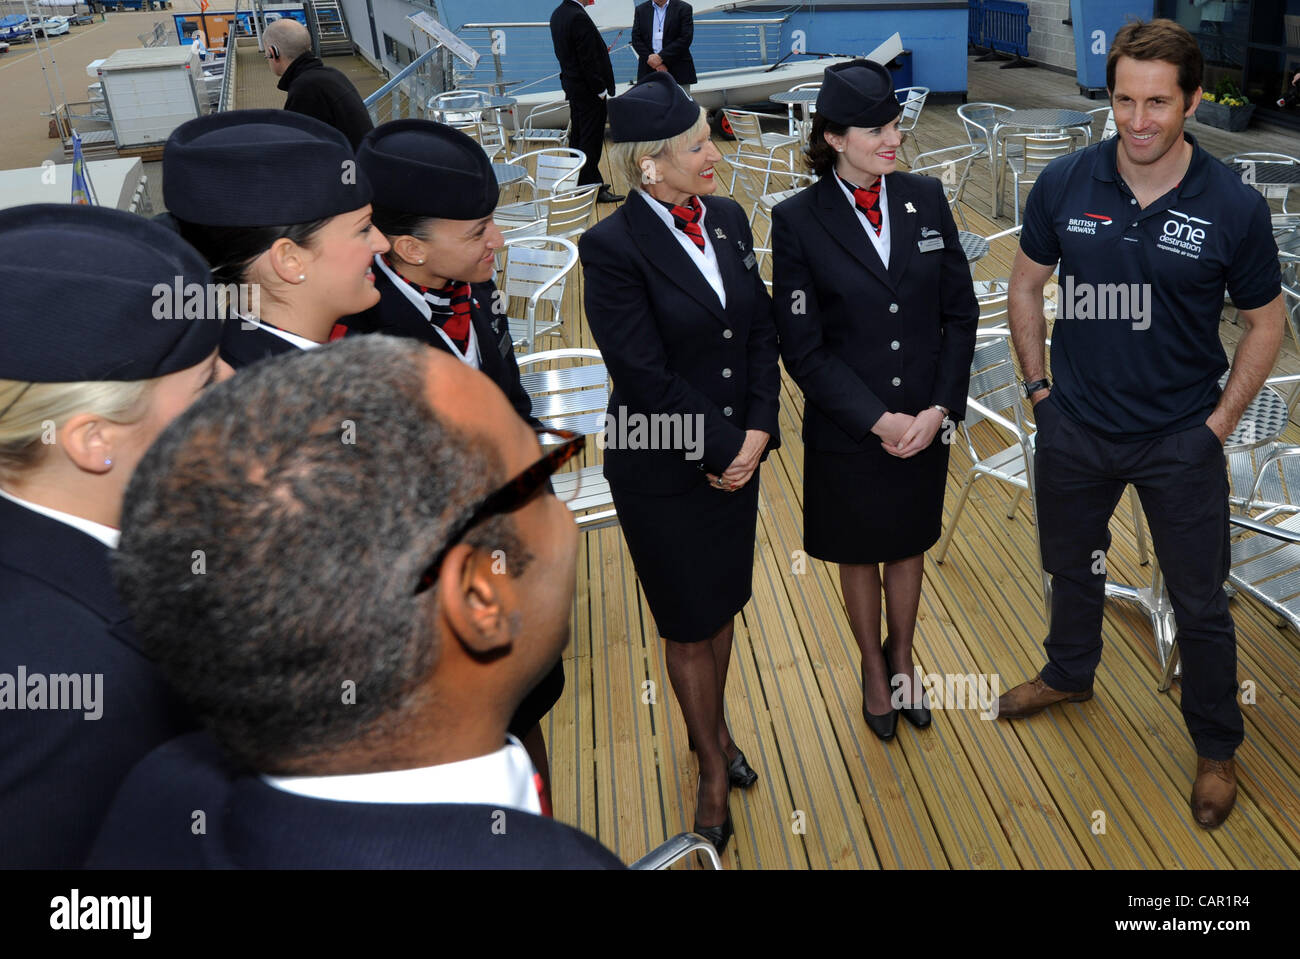 Ben Ainslie, Olympic gold medal sailor from Team GB, meeting with British Airways cabin crew at a new solar panel installation loan scheme launched by the airline at Portland in Dorset. 10/04/2012. Credit Line : Credit:  Dorset Media Service / Alamy Live News Stock Photo